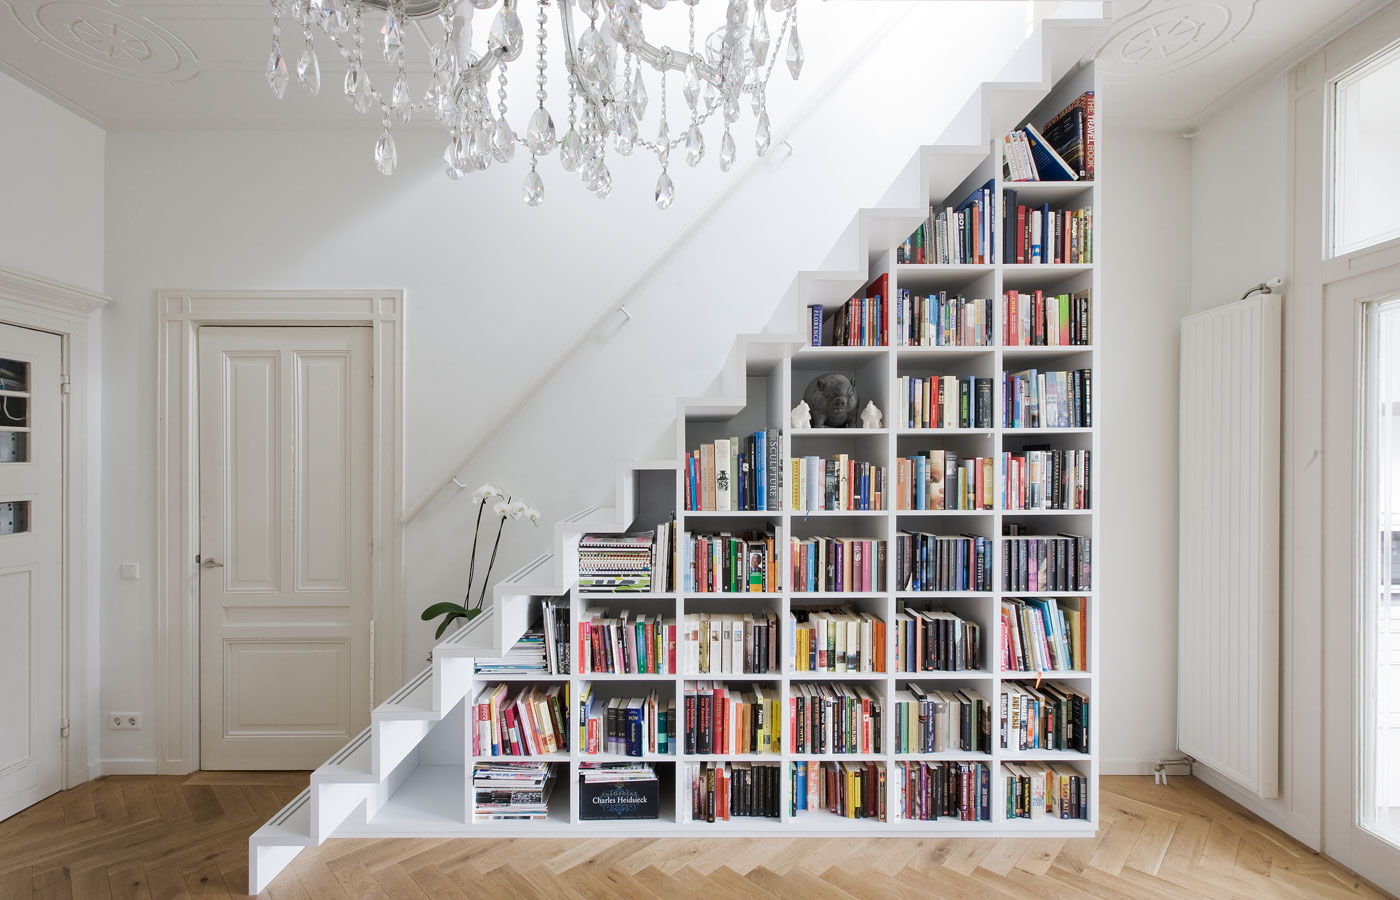 Beautiful Bookcases and Creative Book Storage Ideas